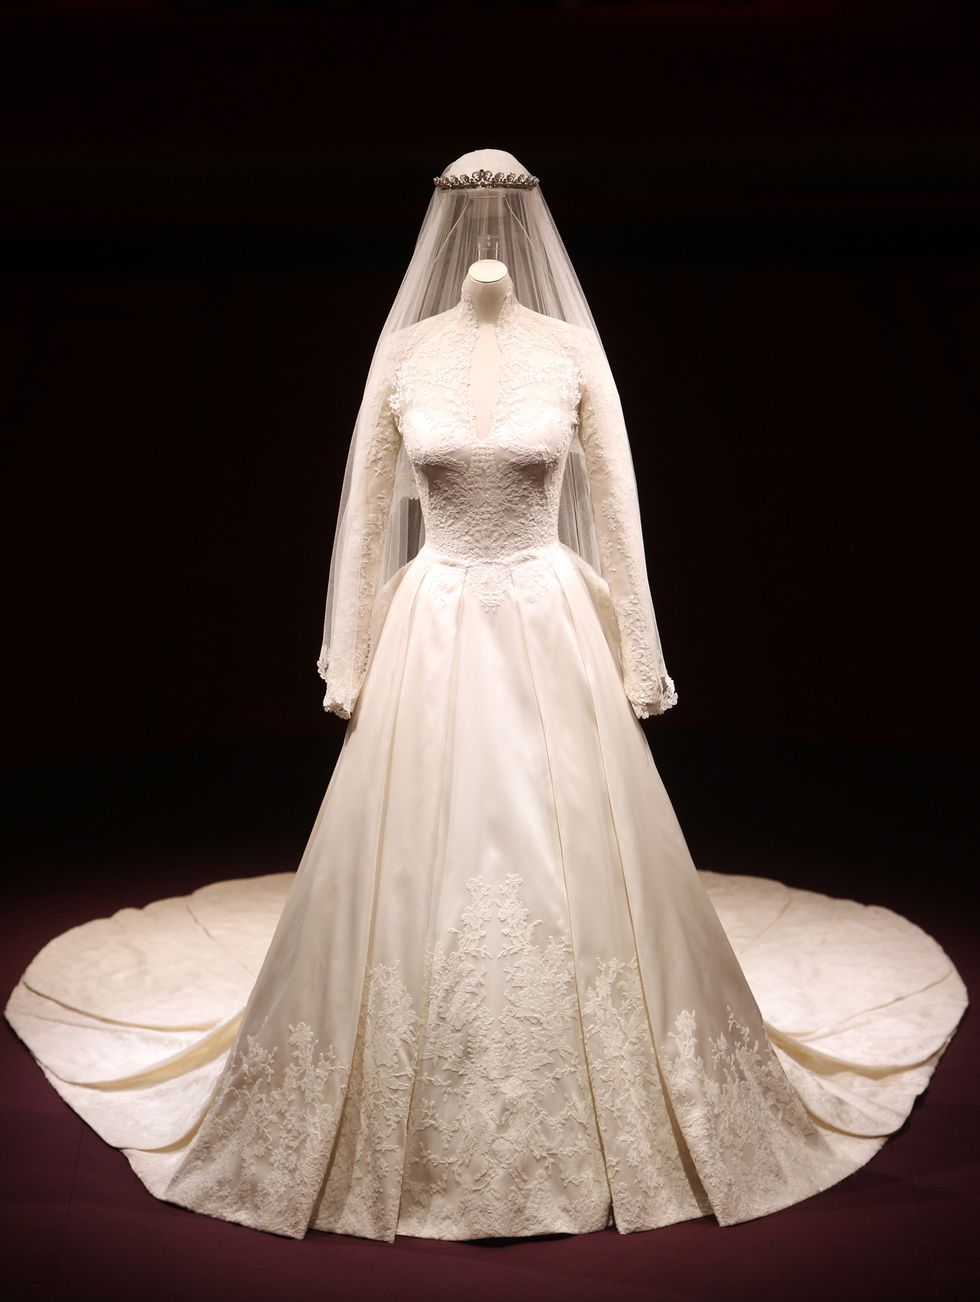 Kate Wedding Dress Details - 8 Things to Know About Kate Middleton's Bridal Gown